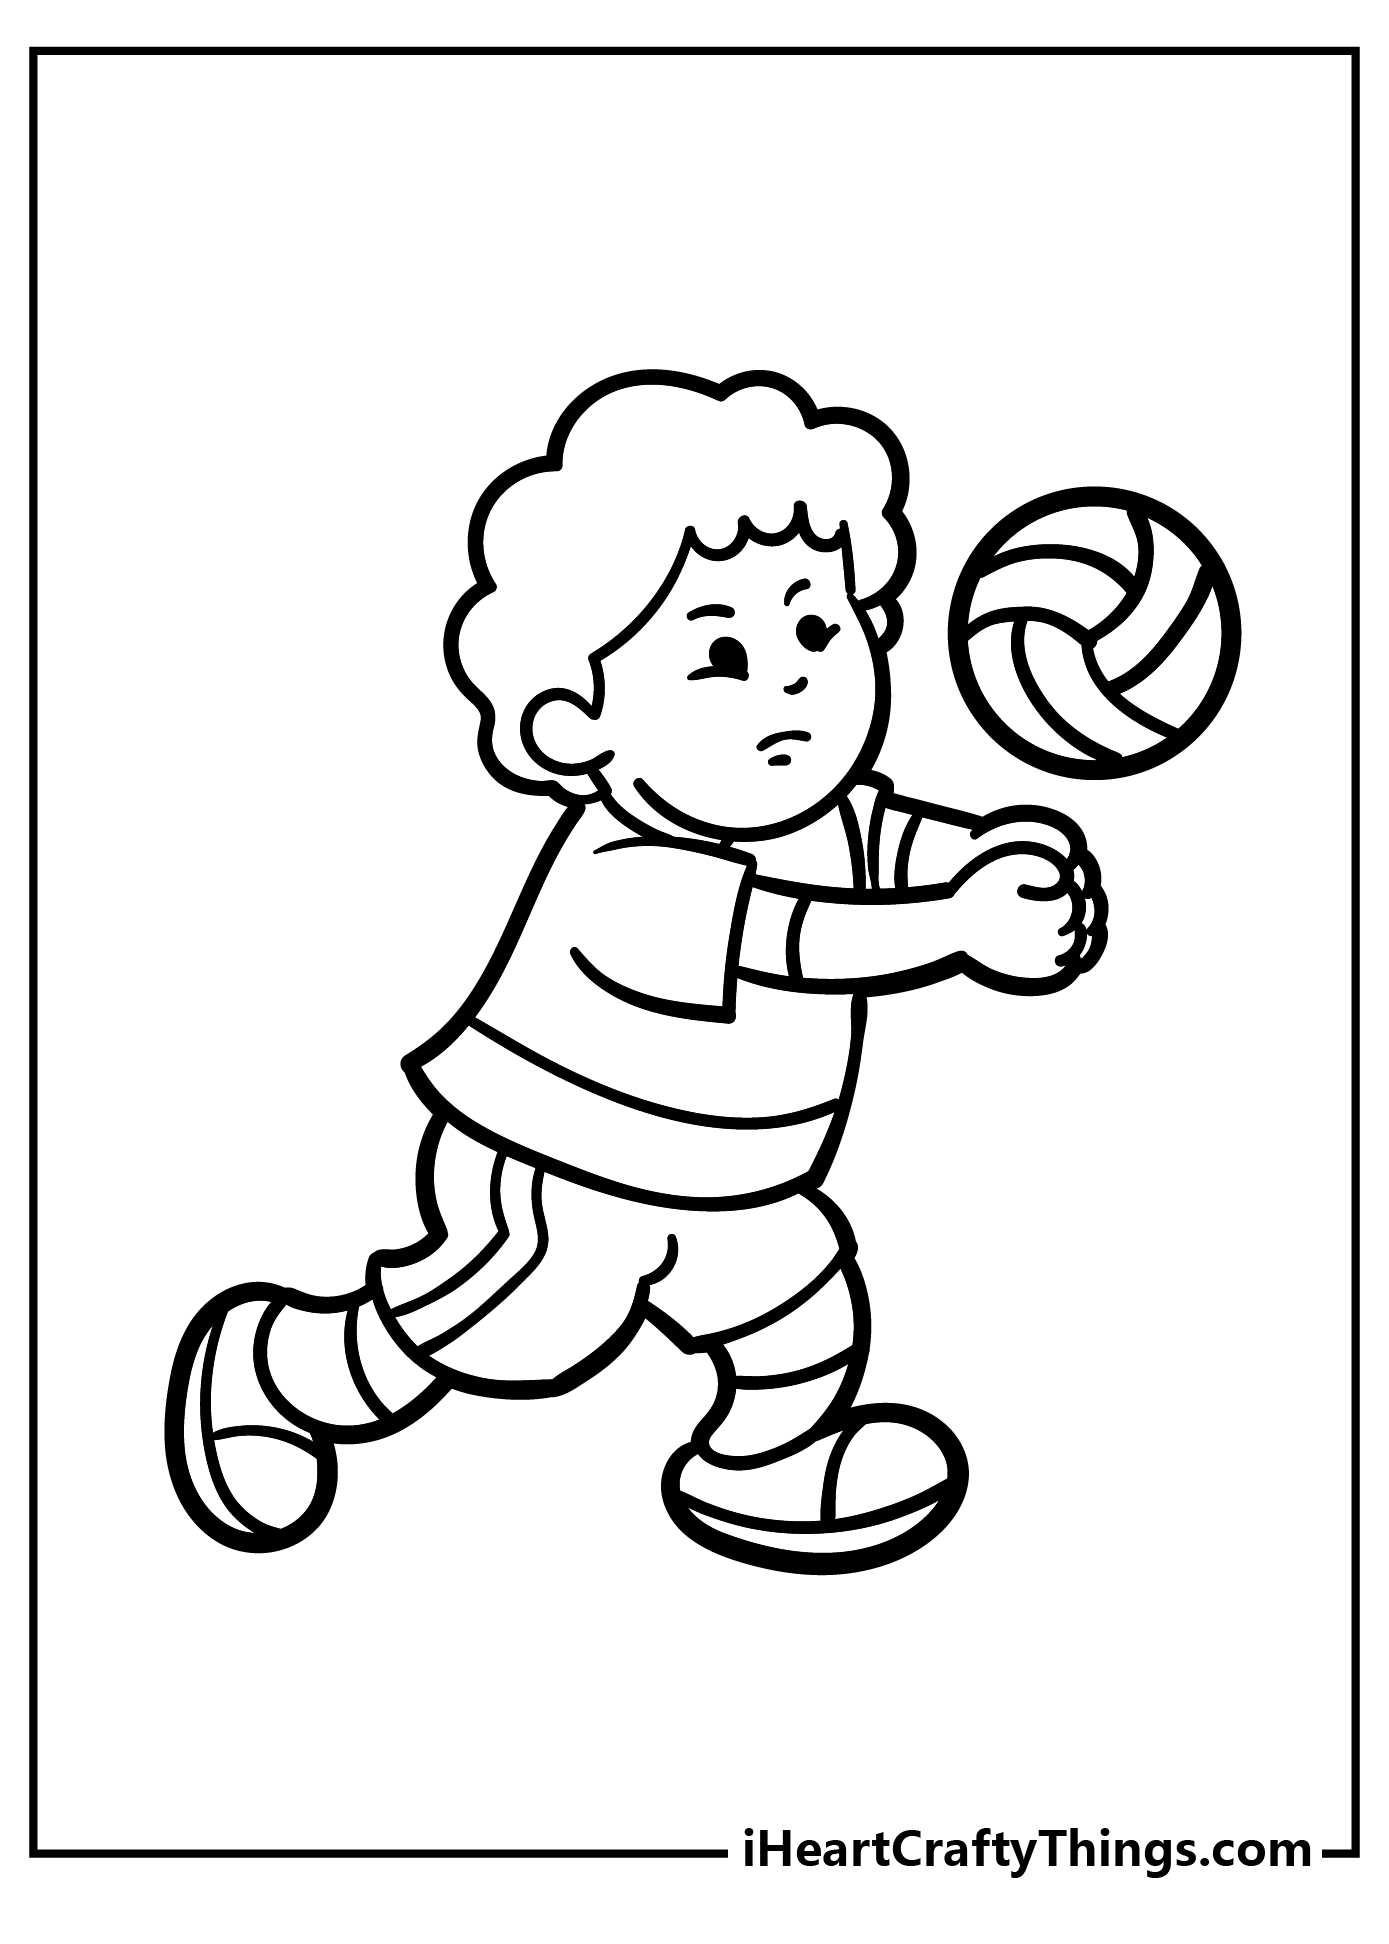 Volleyball Easy Coloring Pages